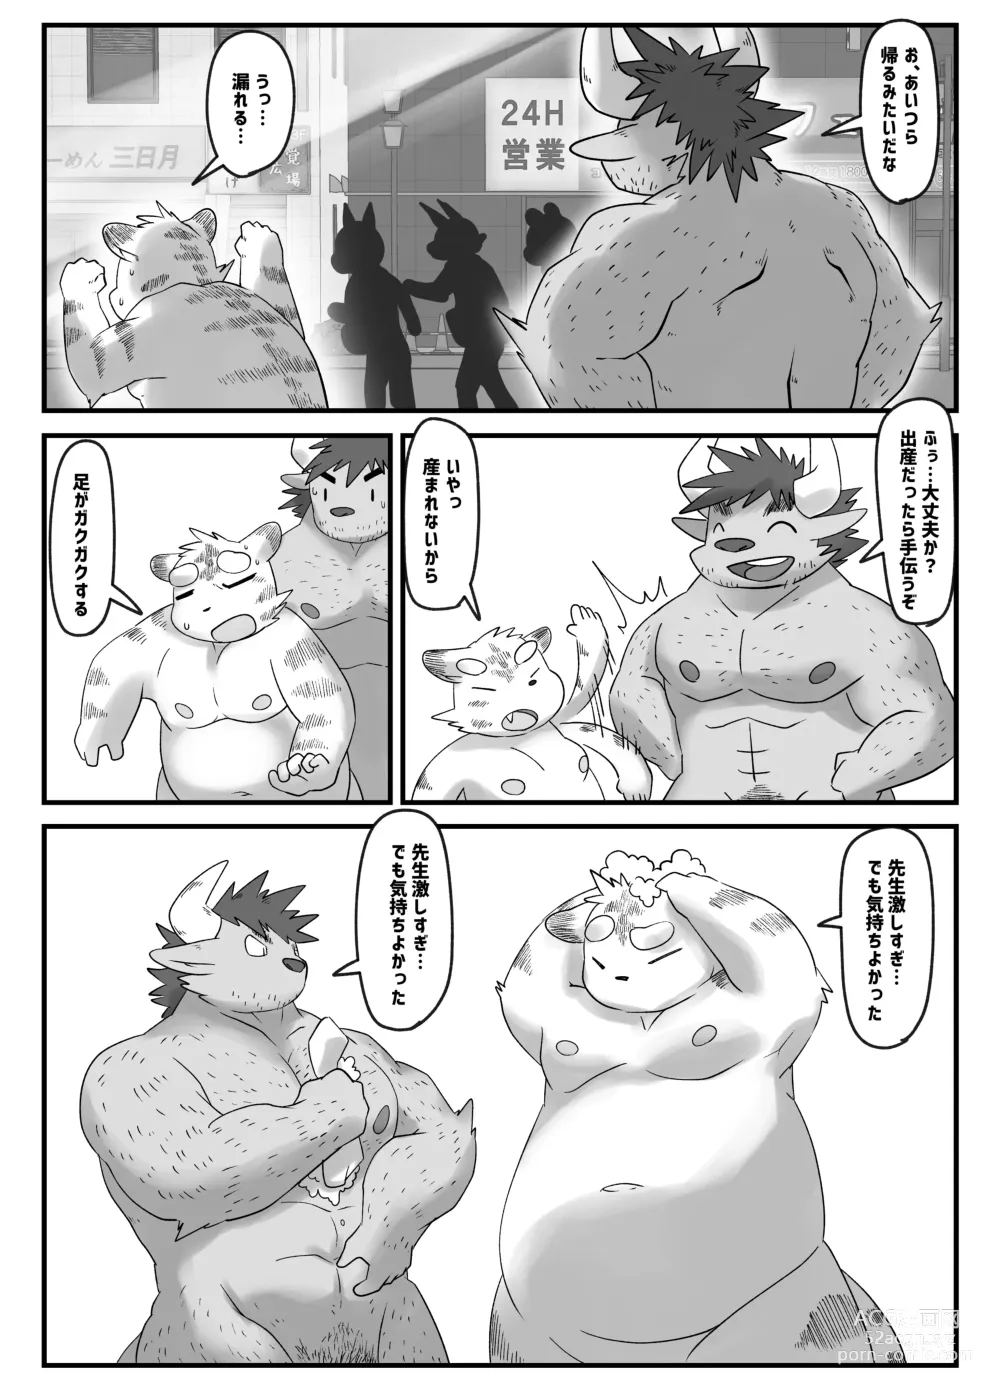 Page 29 of doujinshi Muscular Bull Teacher & Chubby Tiger Student 4